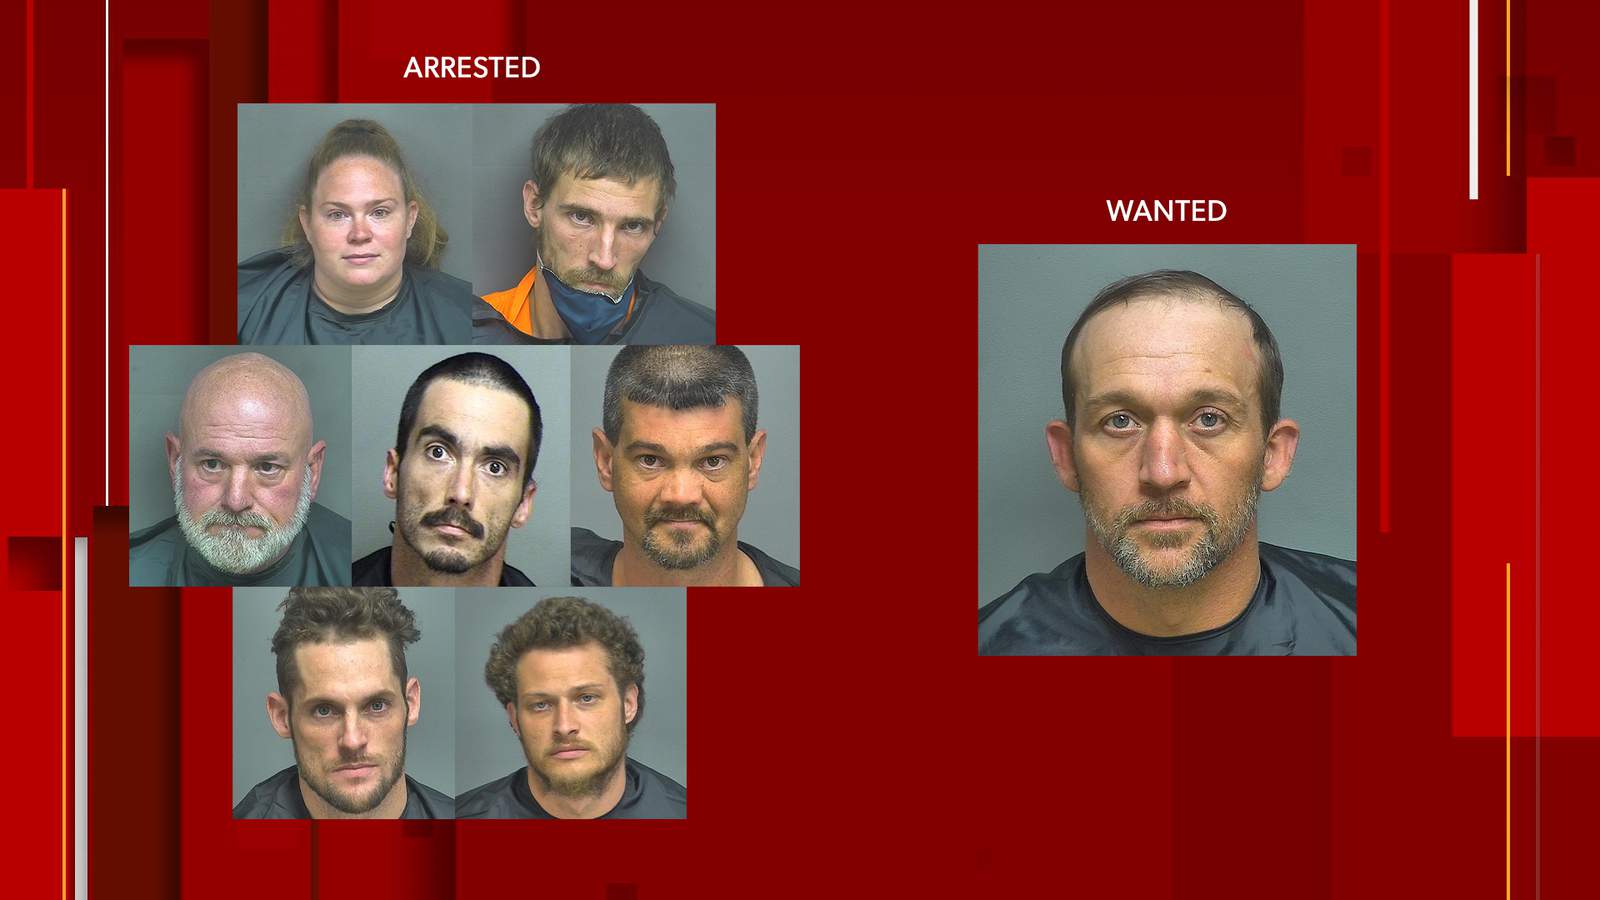 7 arrested, 1 wanted for stealing catalytic converters in Amherst County